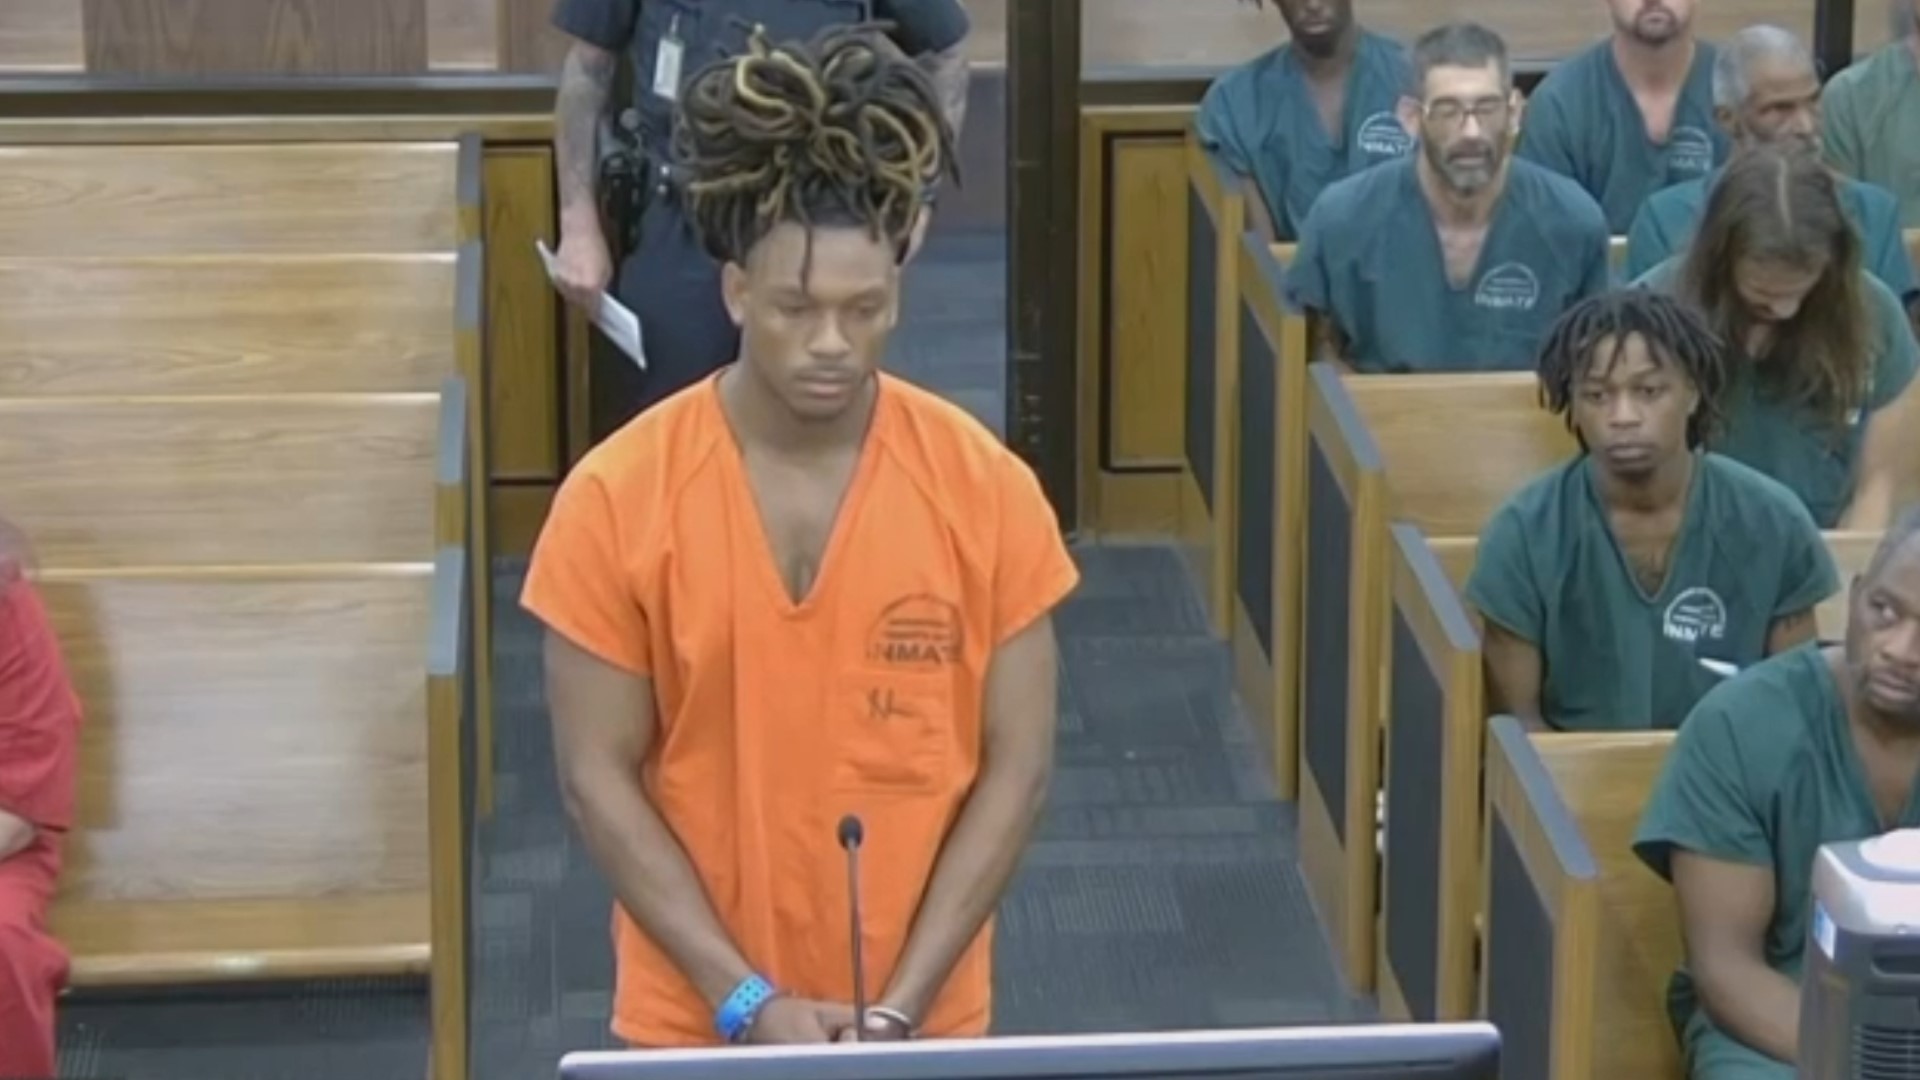 Jacksonville Jaguar safety Chris Claybrooks makes first appearance in court | firstcoastnews.com